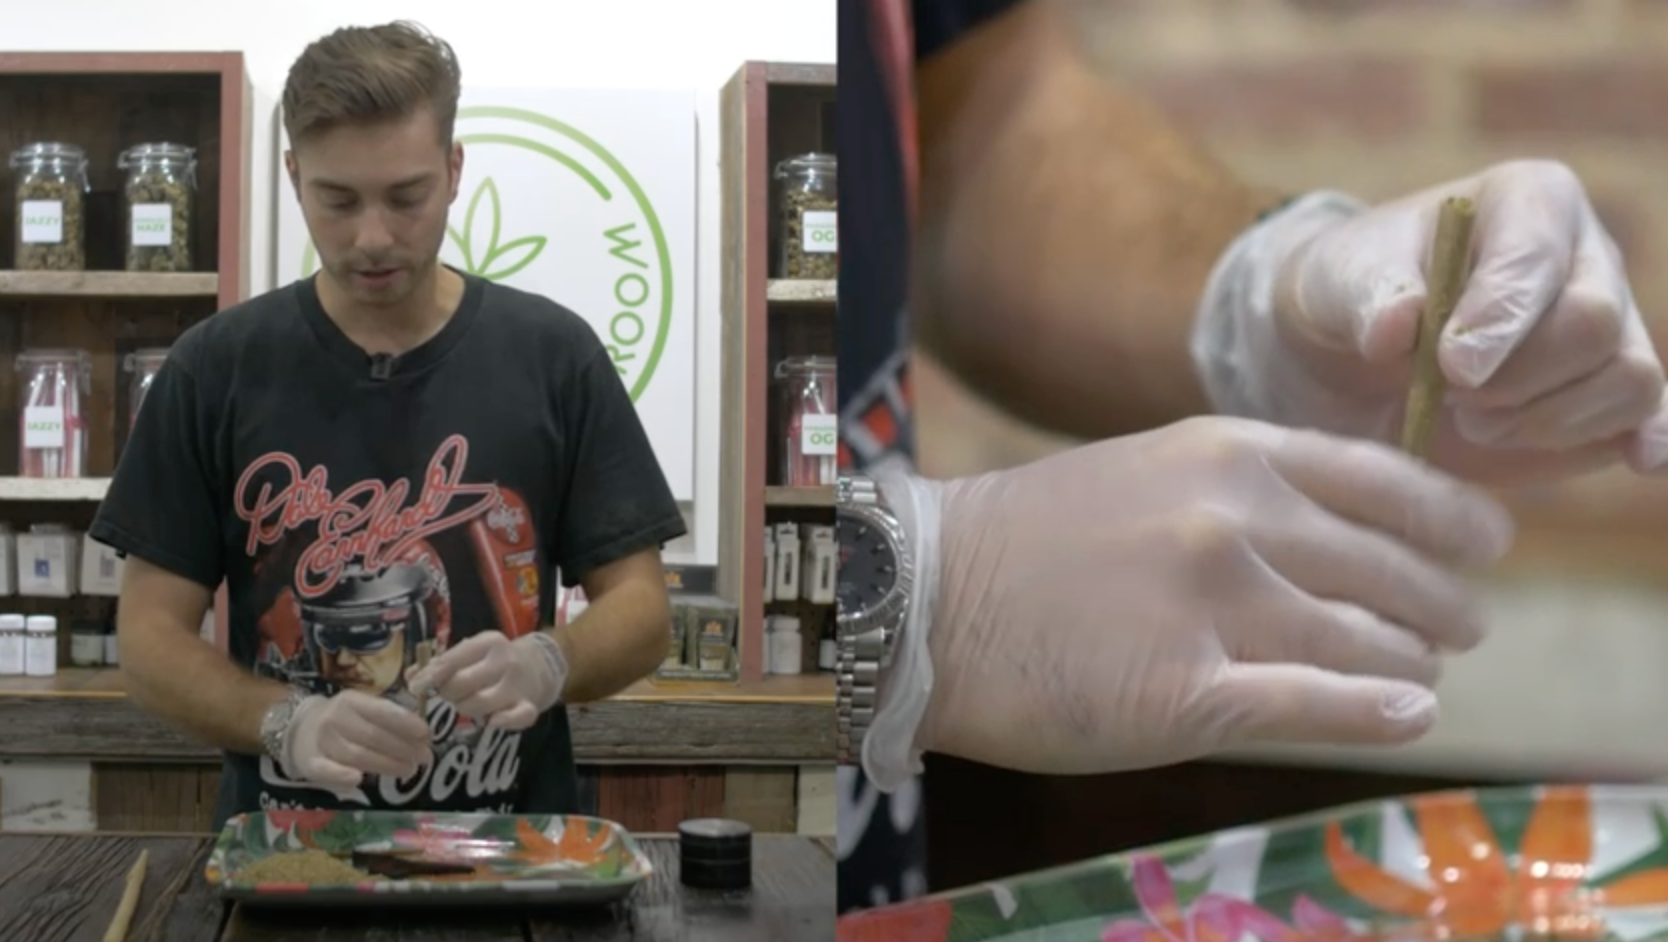 How To: Properly Fill a CBD Pre-rolled Cone (Green Room style) 😎